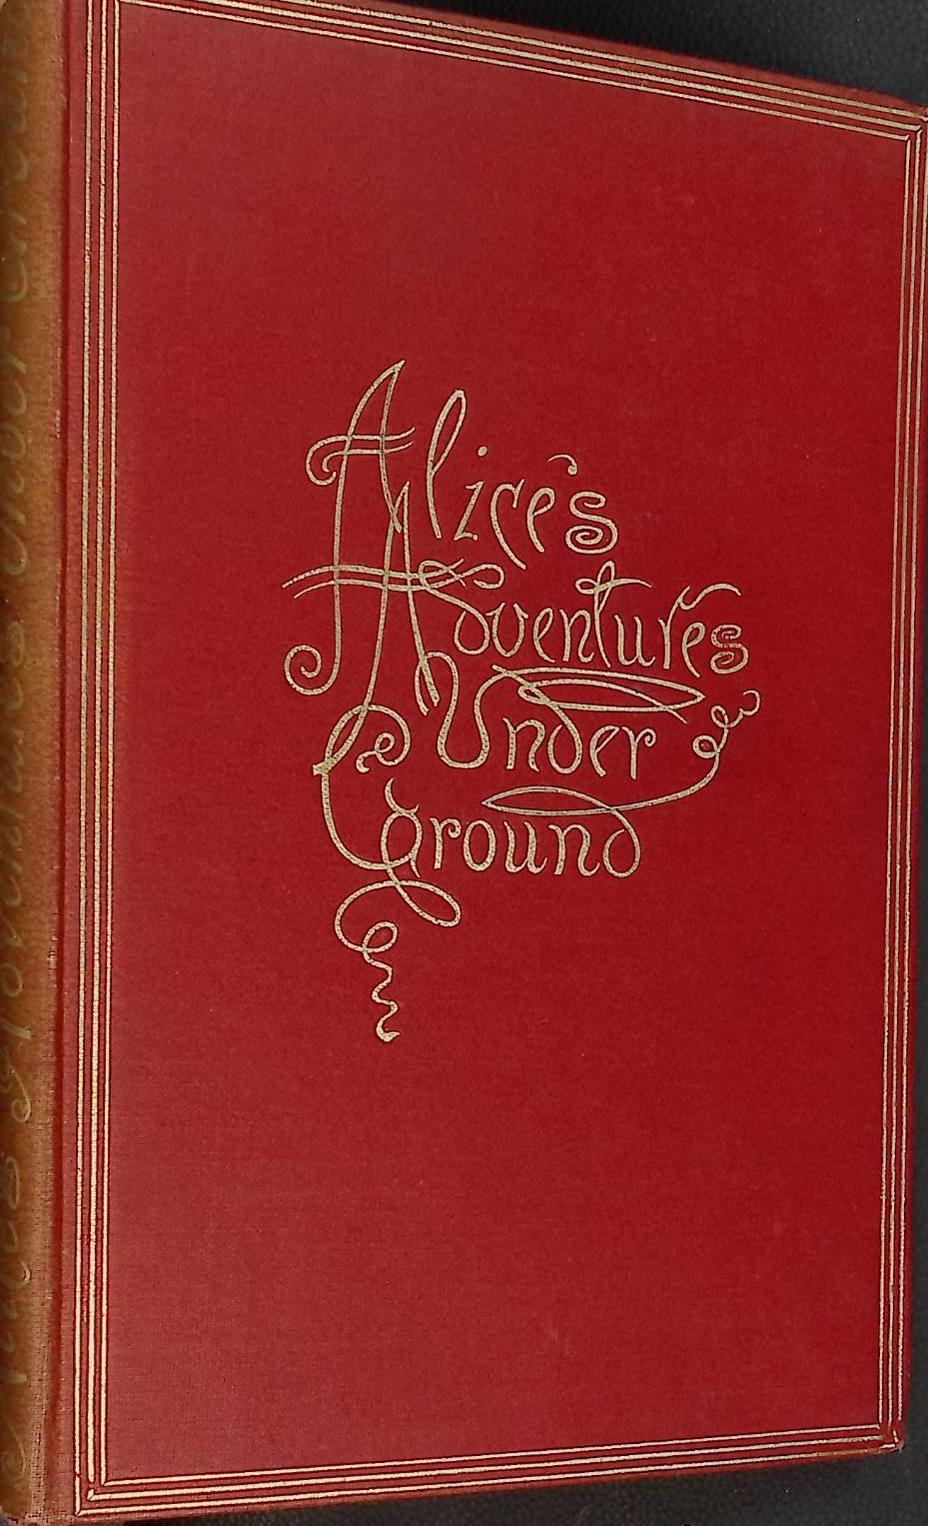 Alice's Adventures Under Ground [Underground]. Being a Facsimile of the Original MS. Book and Afterwards Developed into "Alice's Adventures in Wonderland"